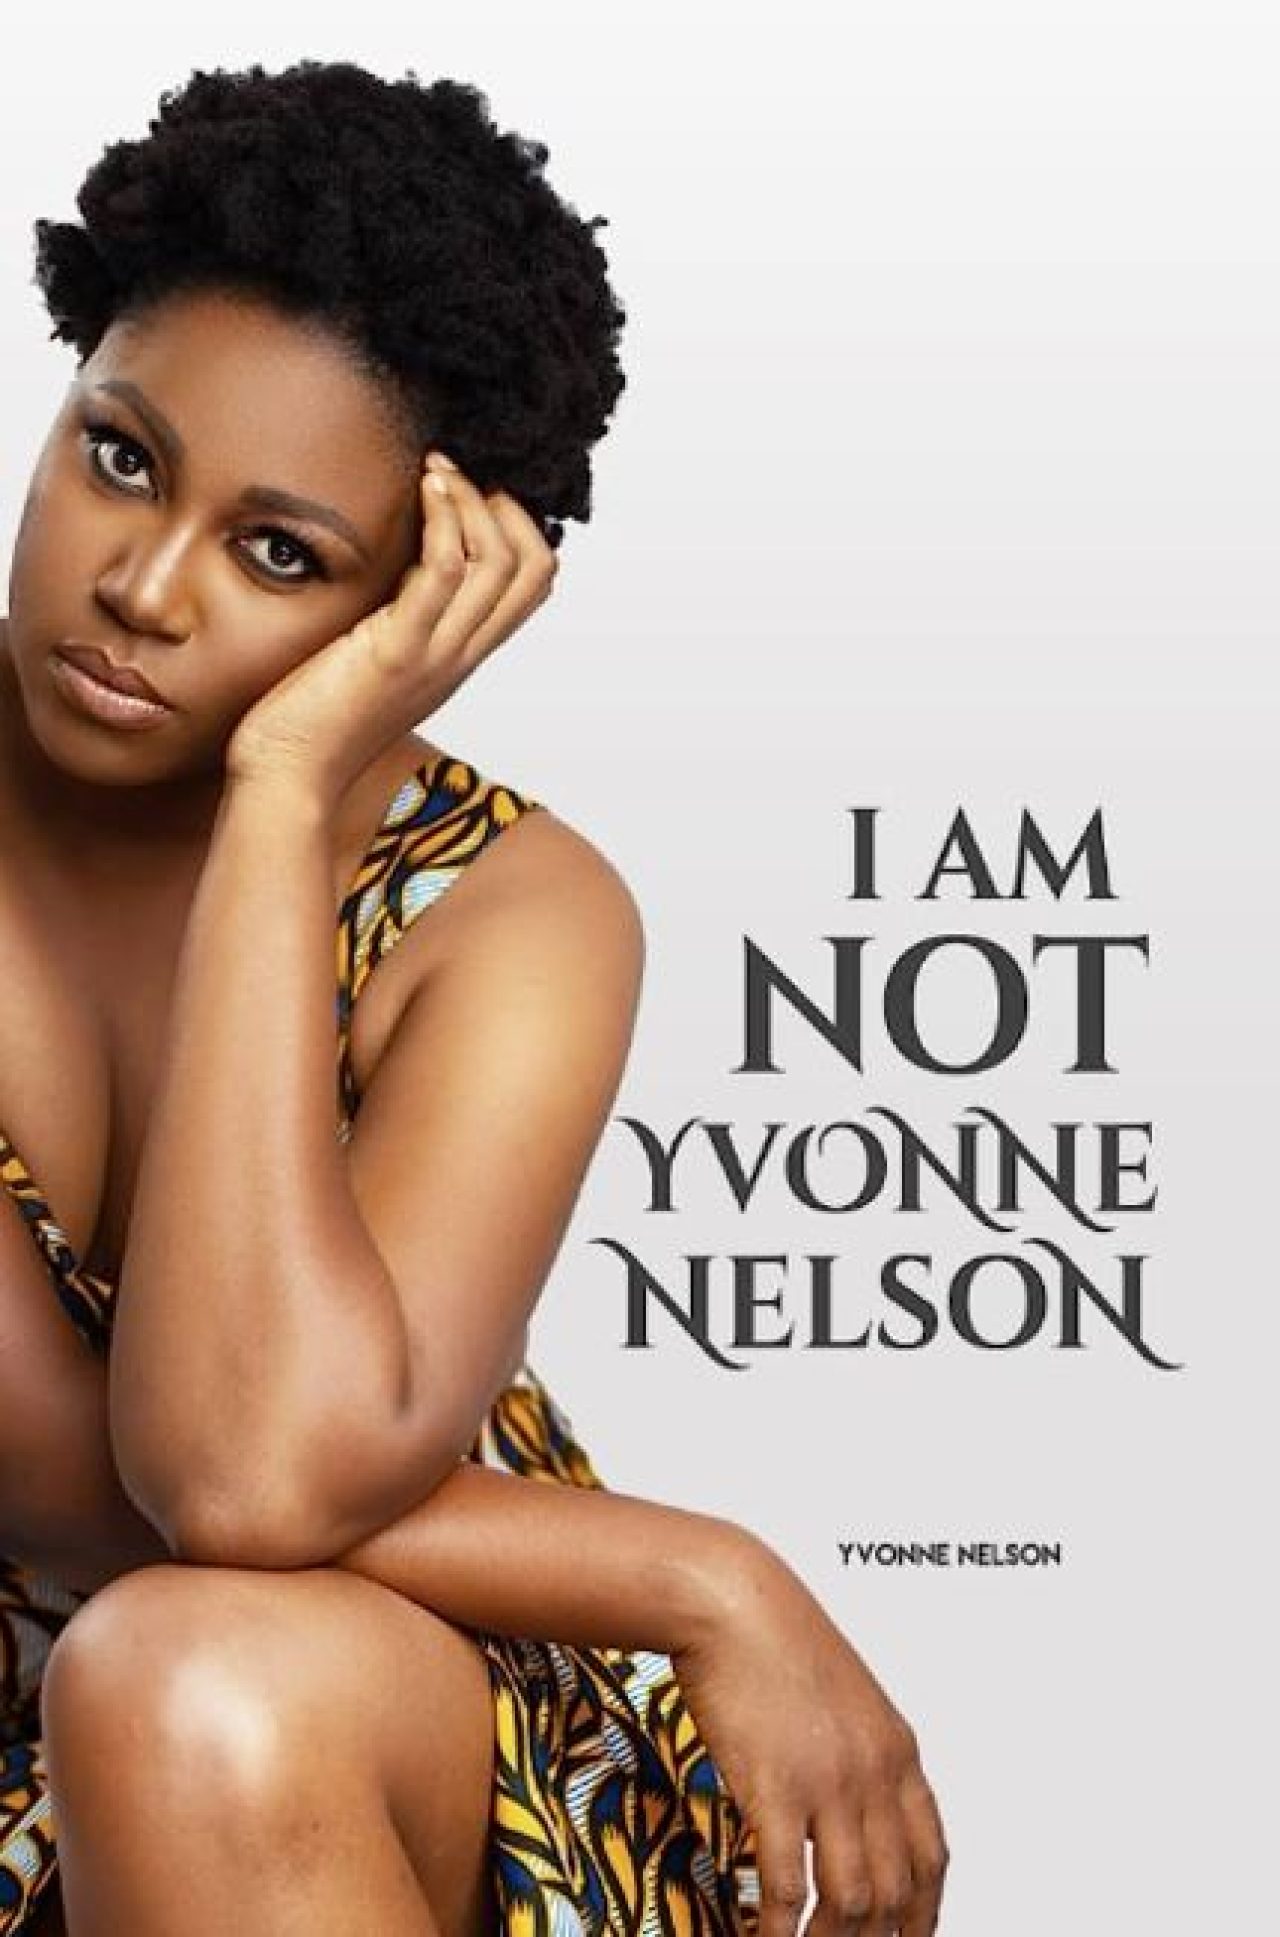 May we not fornicate with people who will write books about us - Ghanaians comment on Yvonne Nelson's Memoir. Afro News Wire